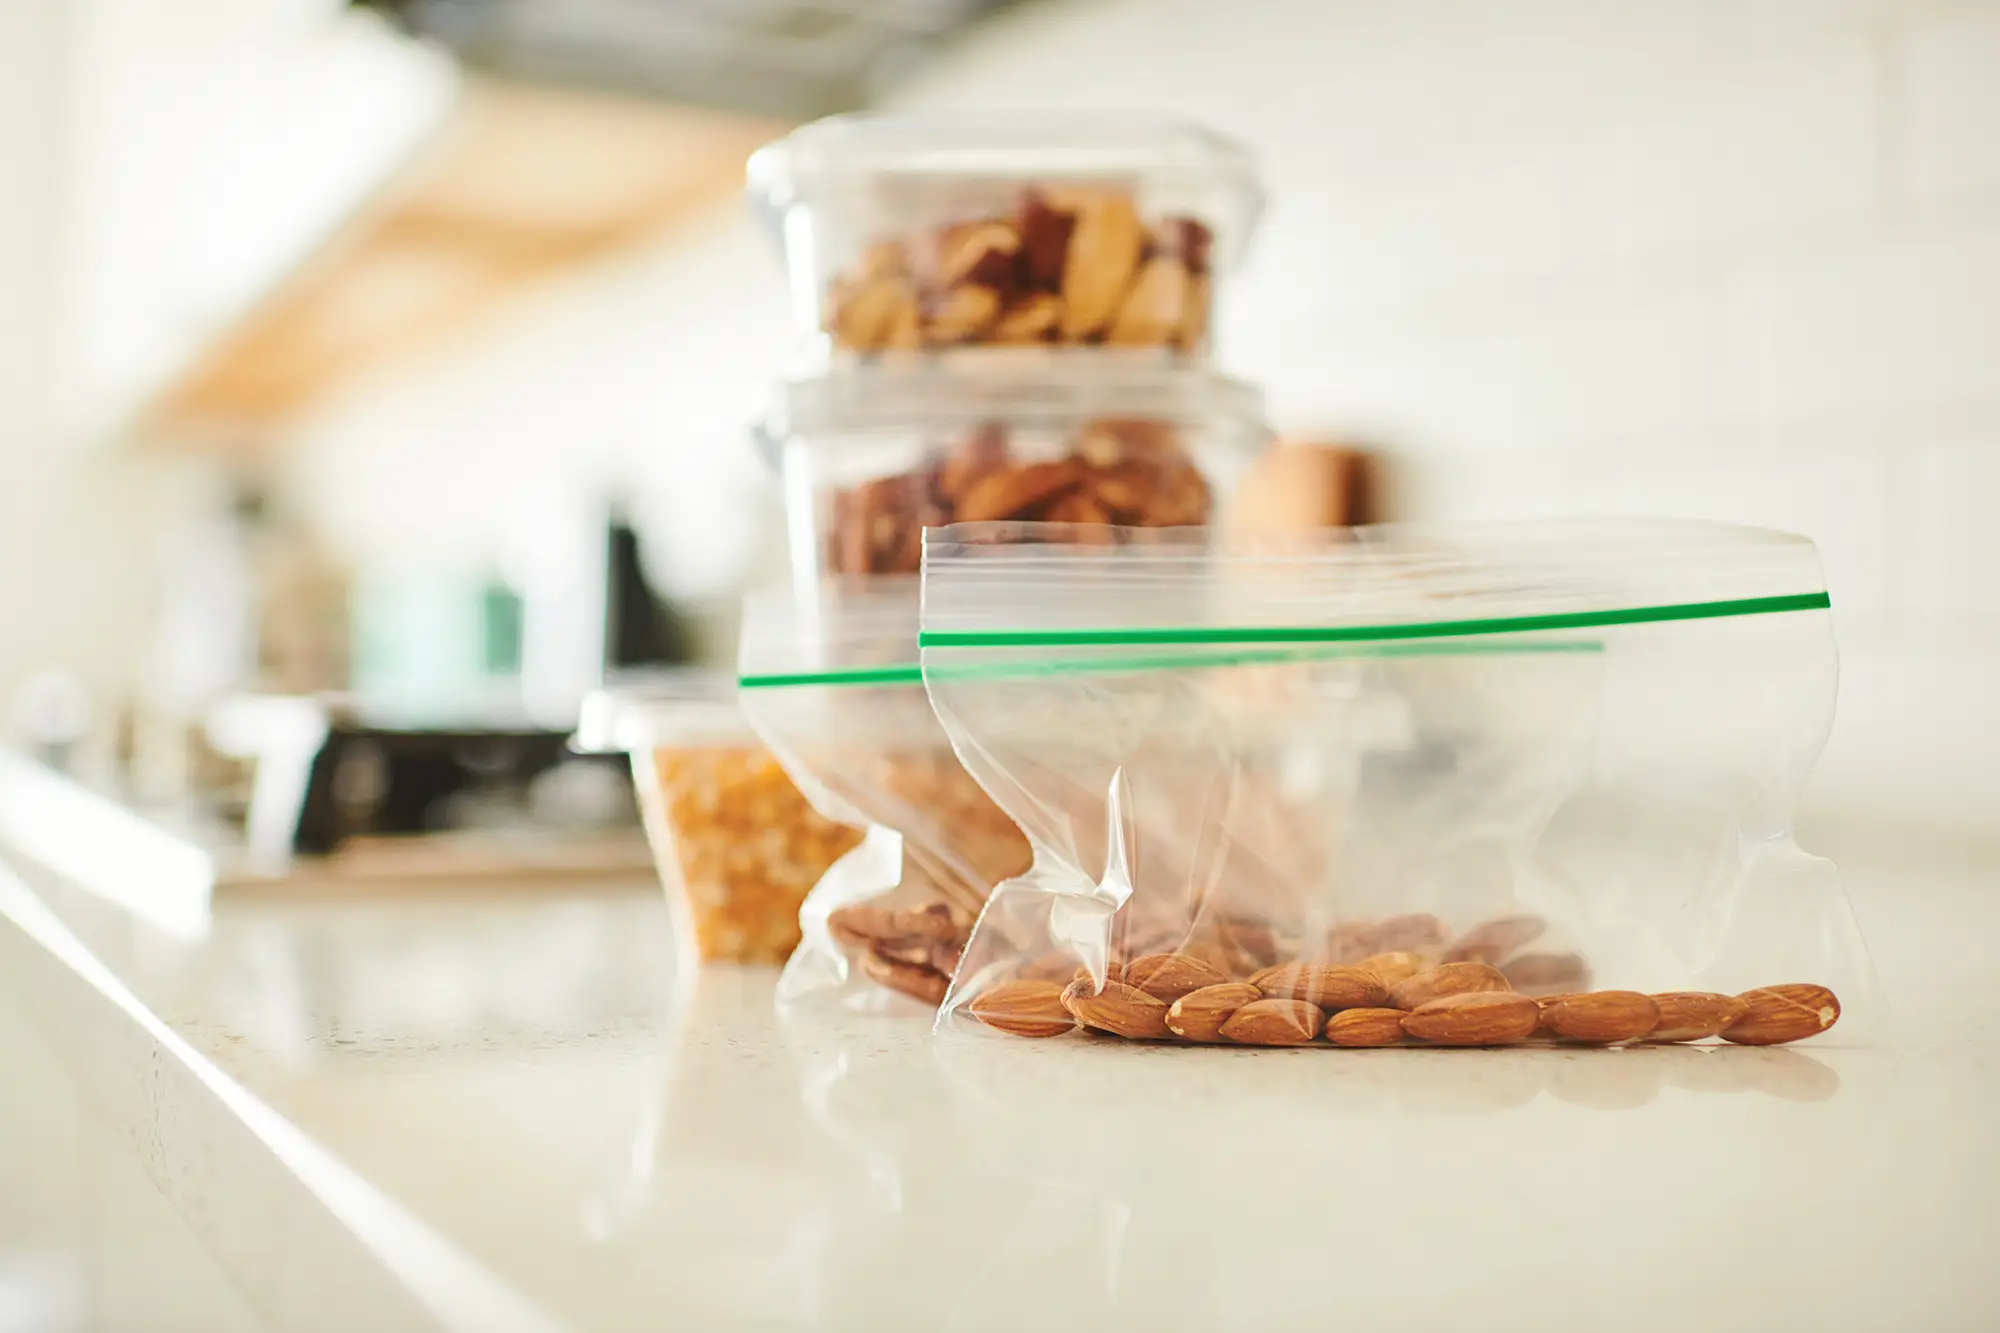 Tips to Stay Healthy During Holiday Travel - spiced nuts healthy snack